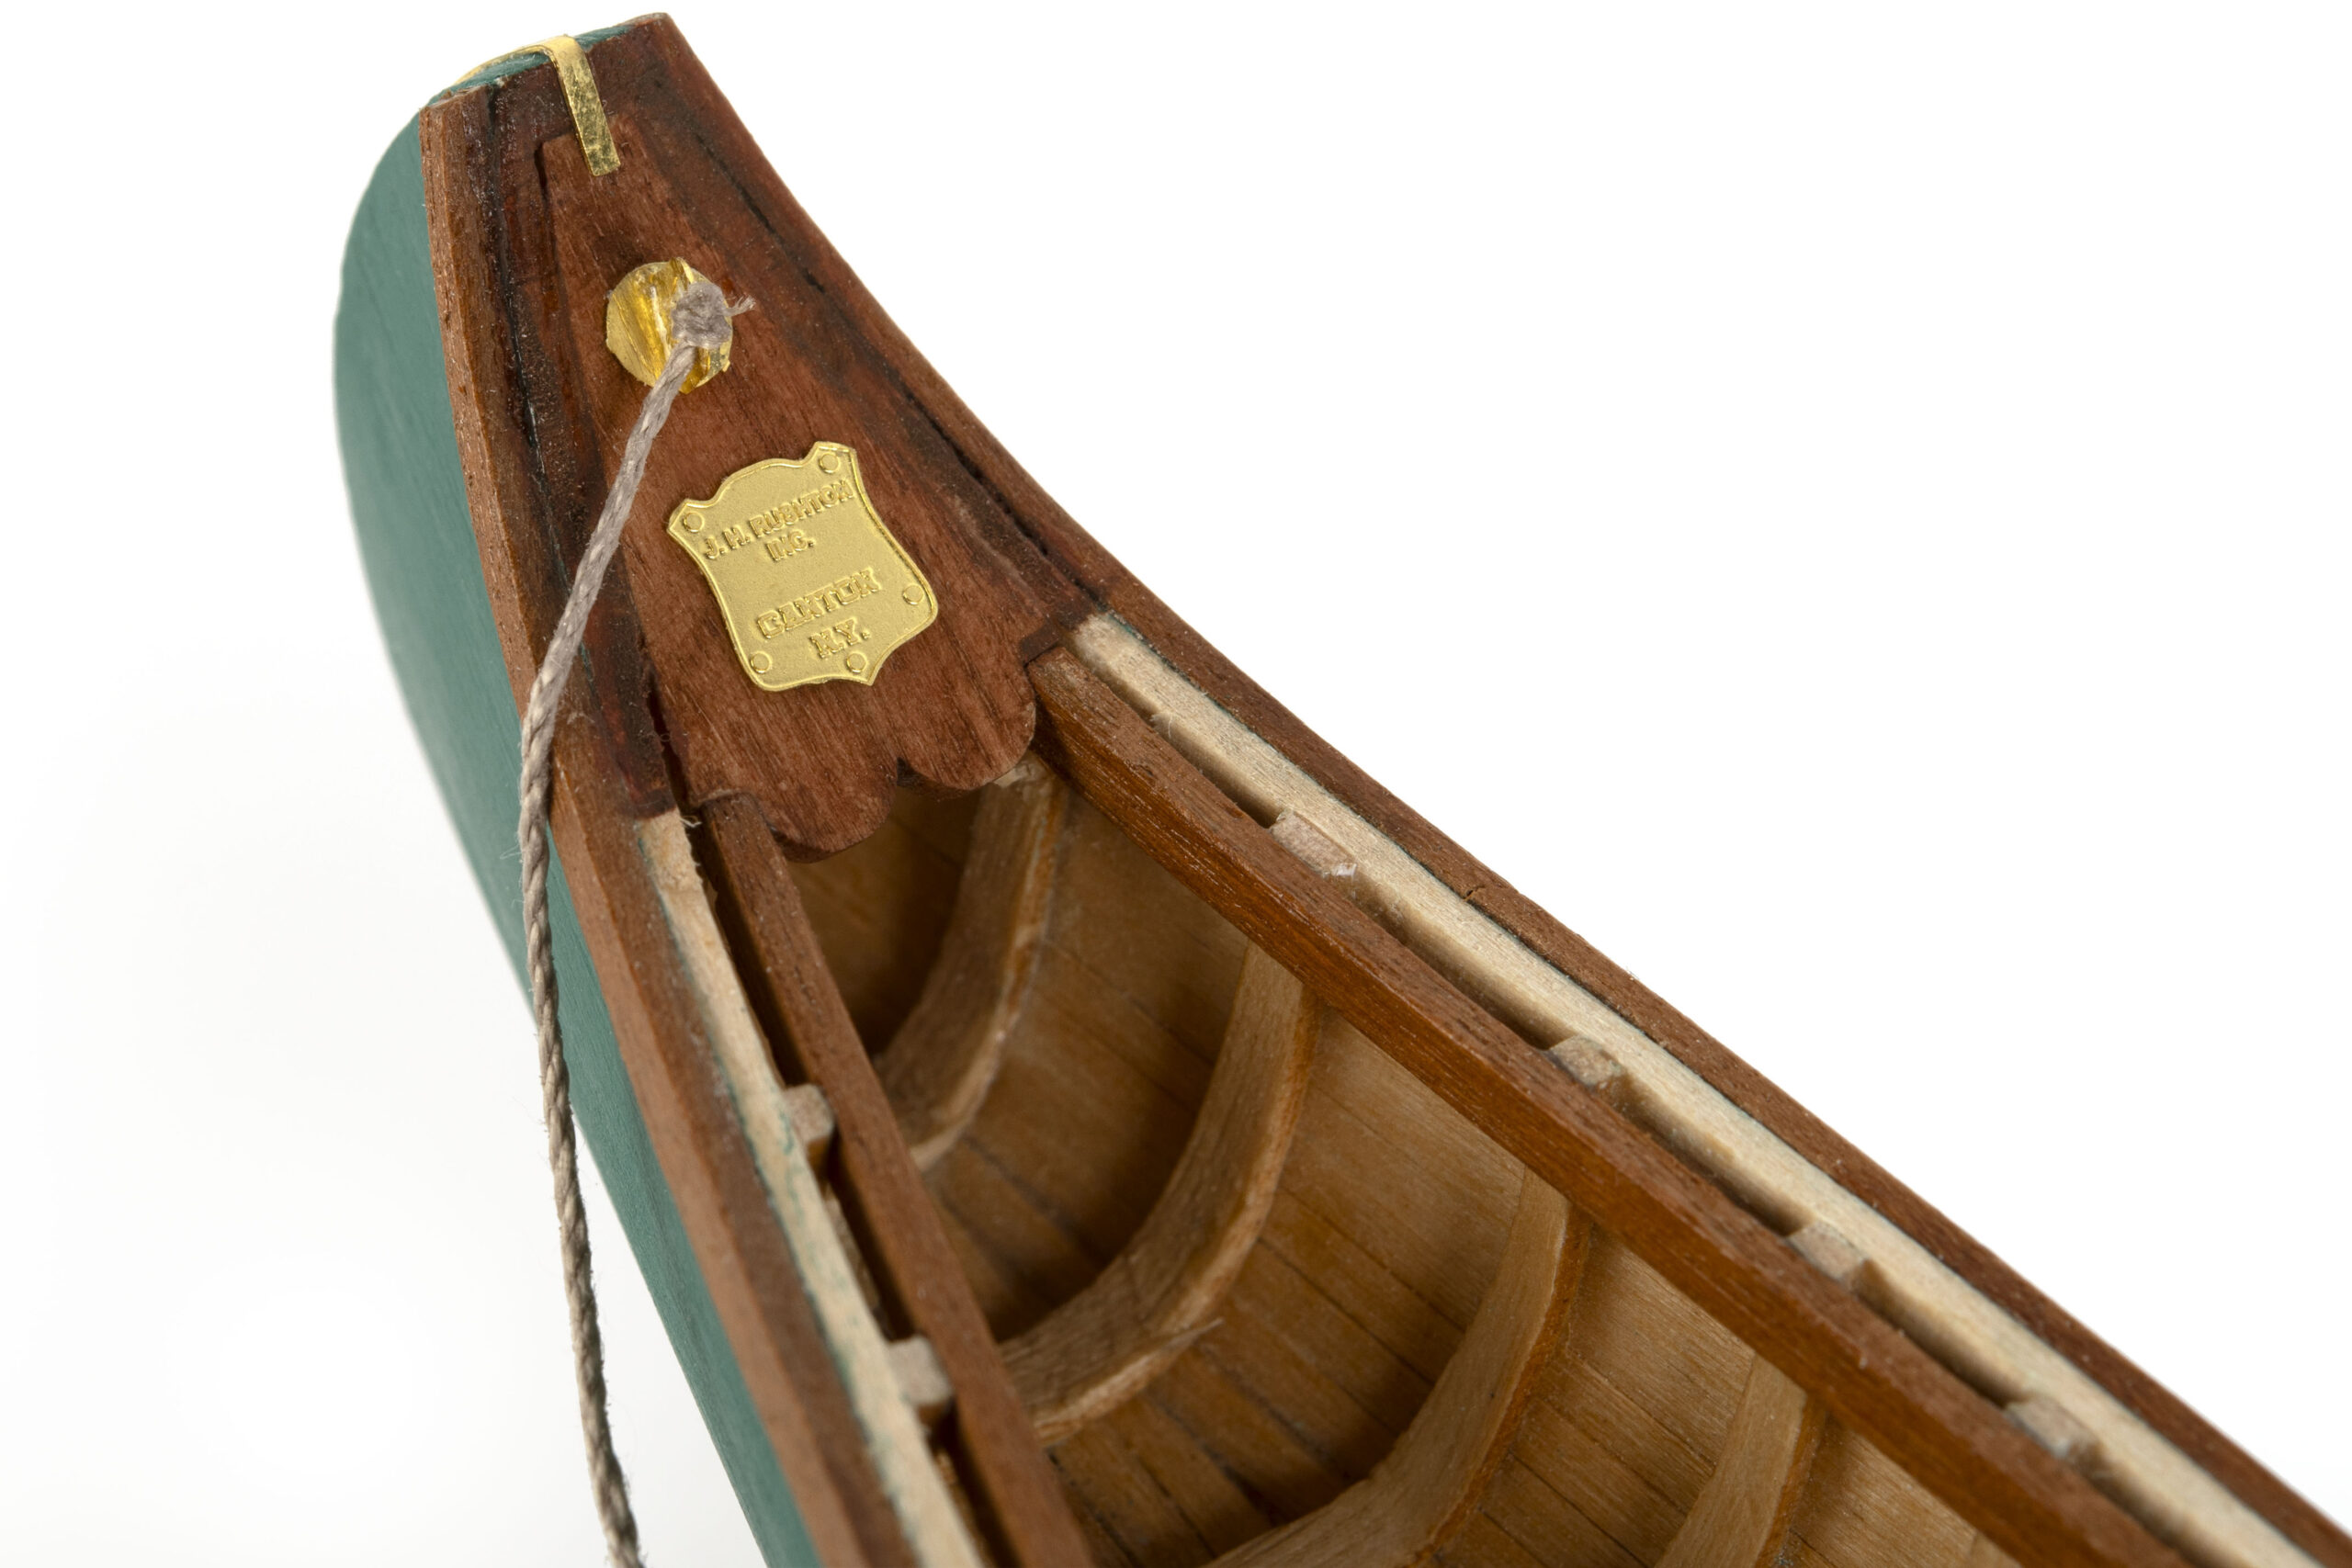 Indian Girl Canoe Model (19000) at 1:16 Scale. Wooden Ship Model Kit for Beginners by Artesanía Latina.